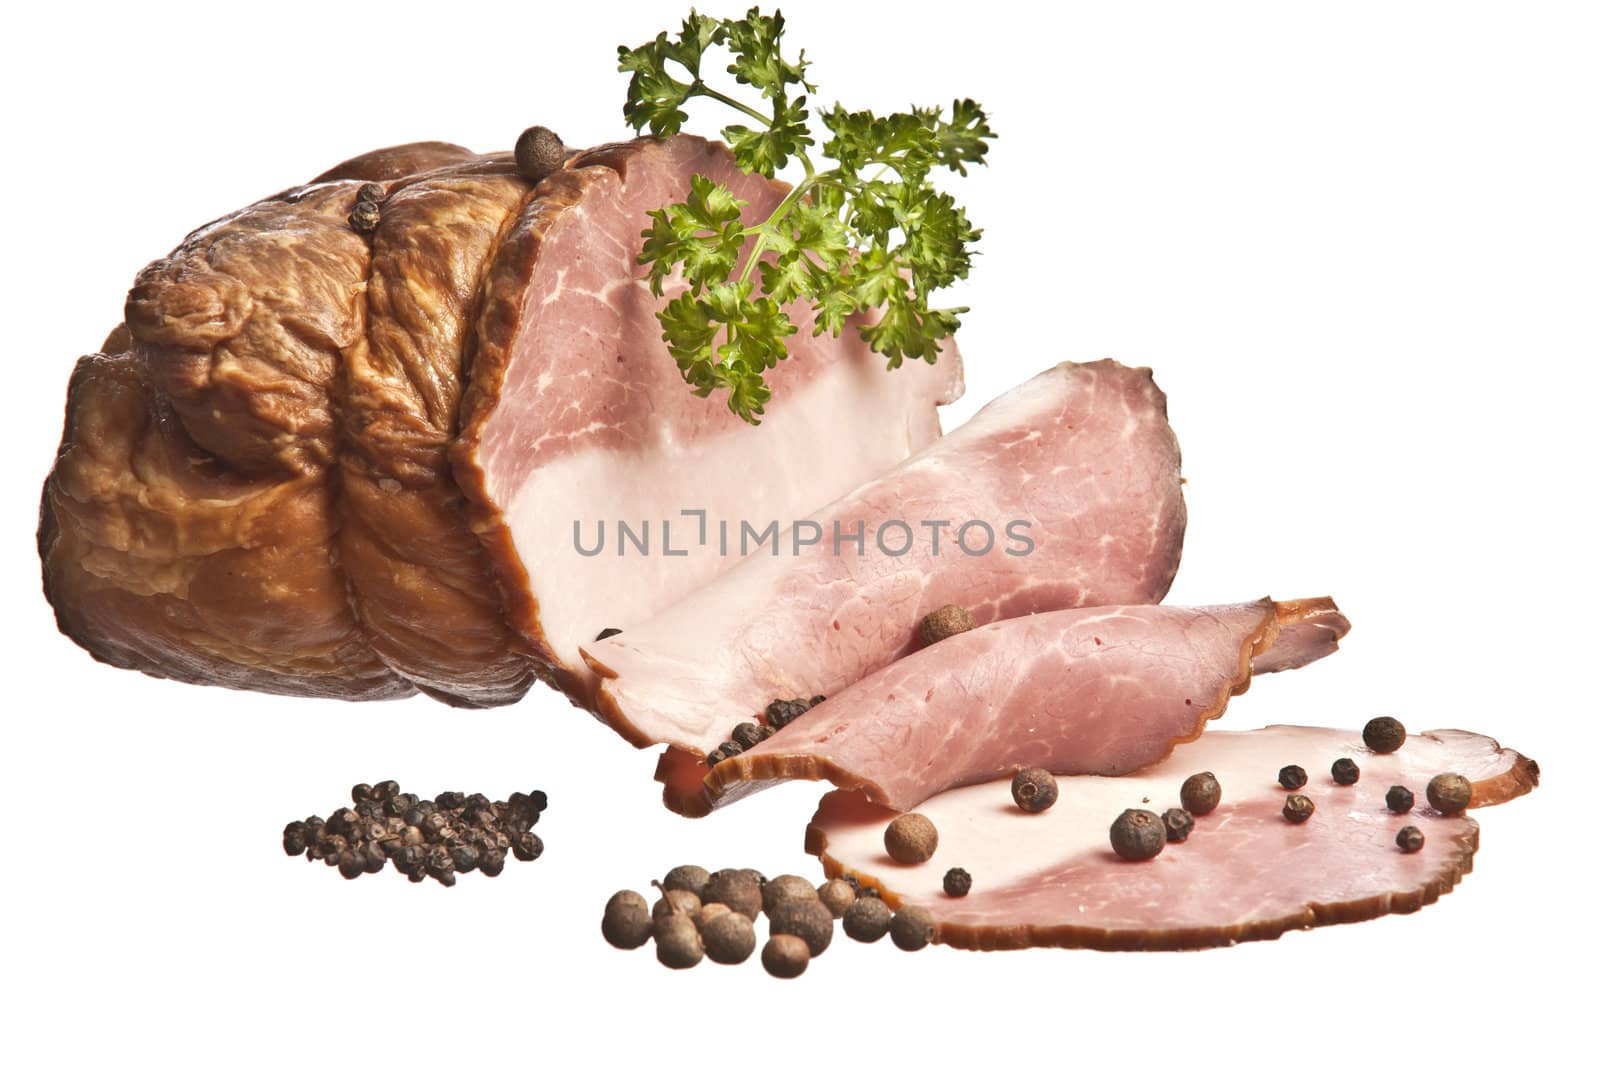 The boiled pork decorated by pepper and a parsley on a white bac by DGolbay